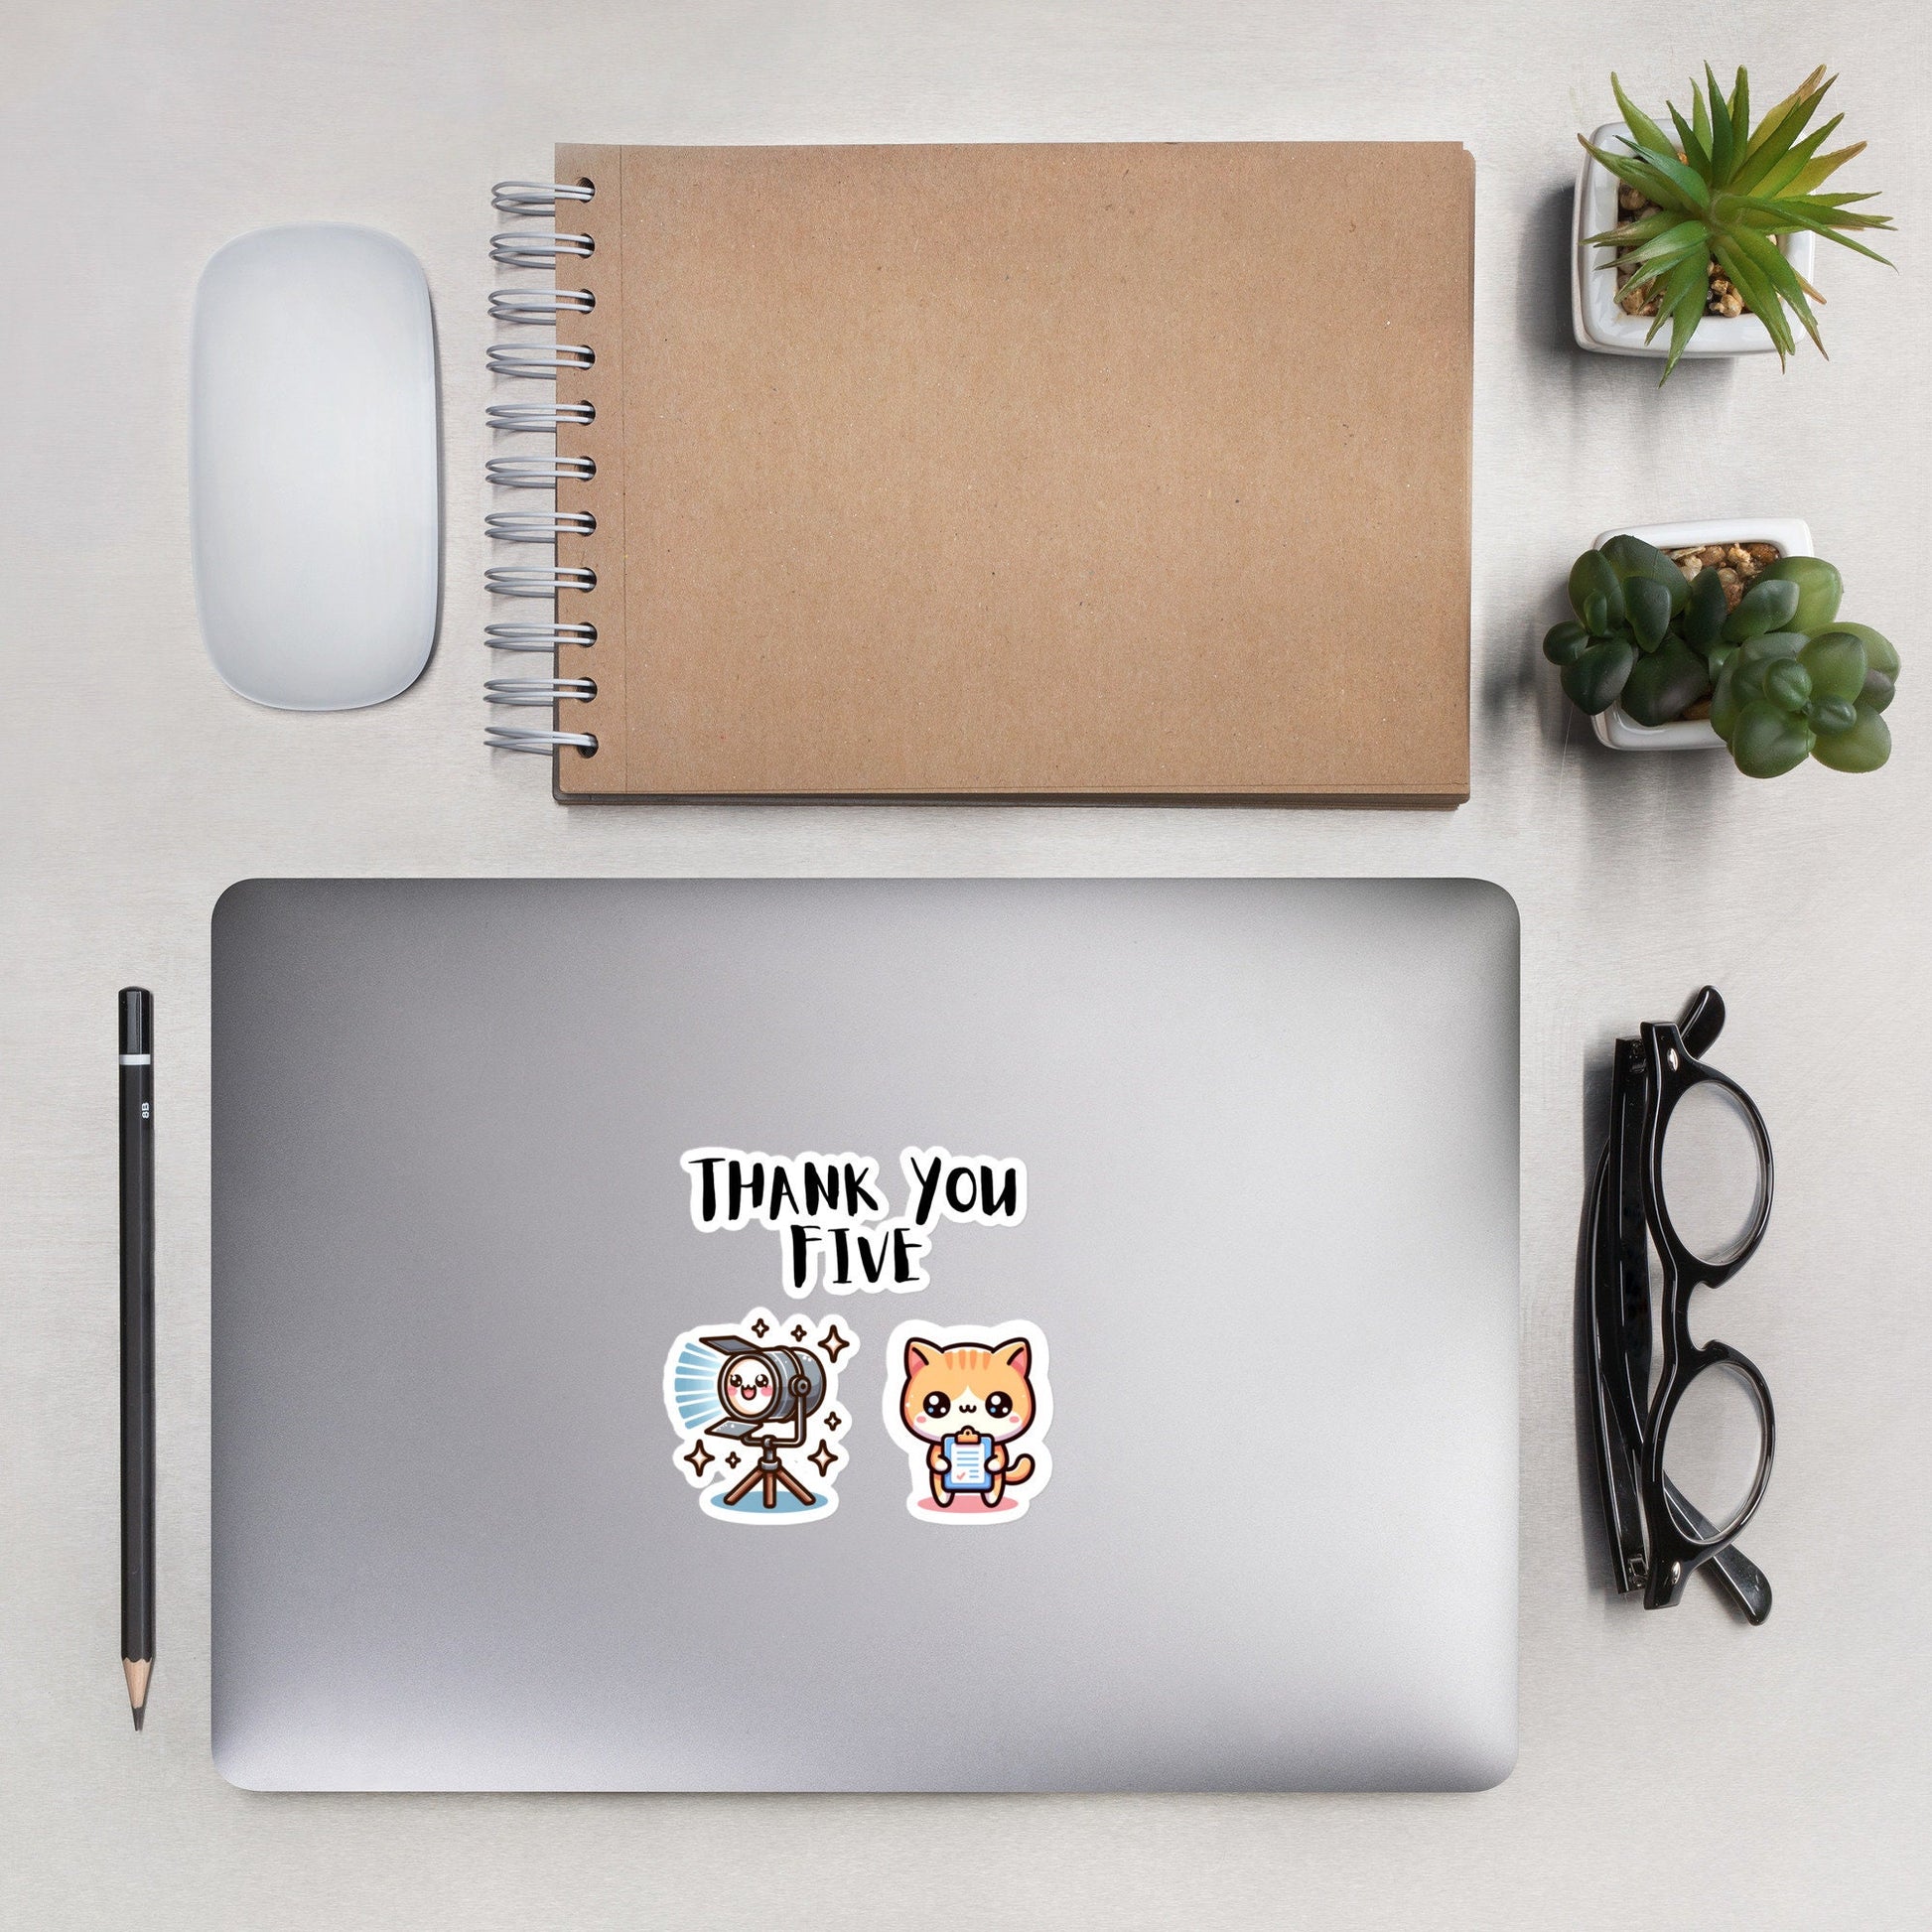 Thank you, Five. Stage Manager sticker theatre humor backstage jokes actor humor Bubble-free stickers